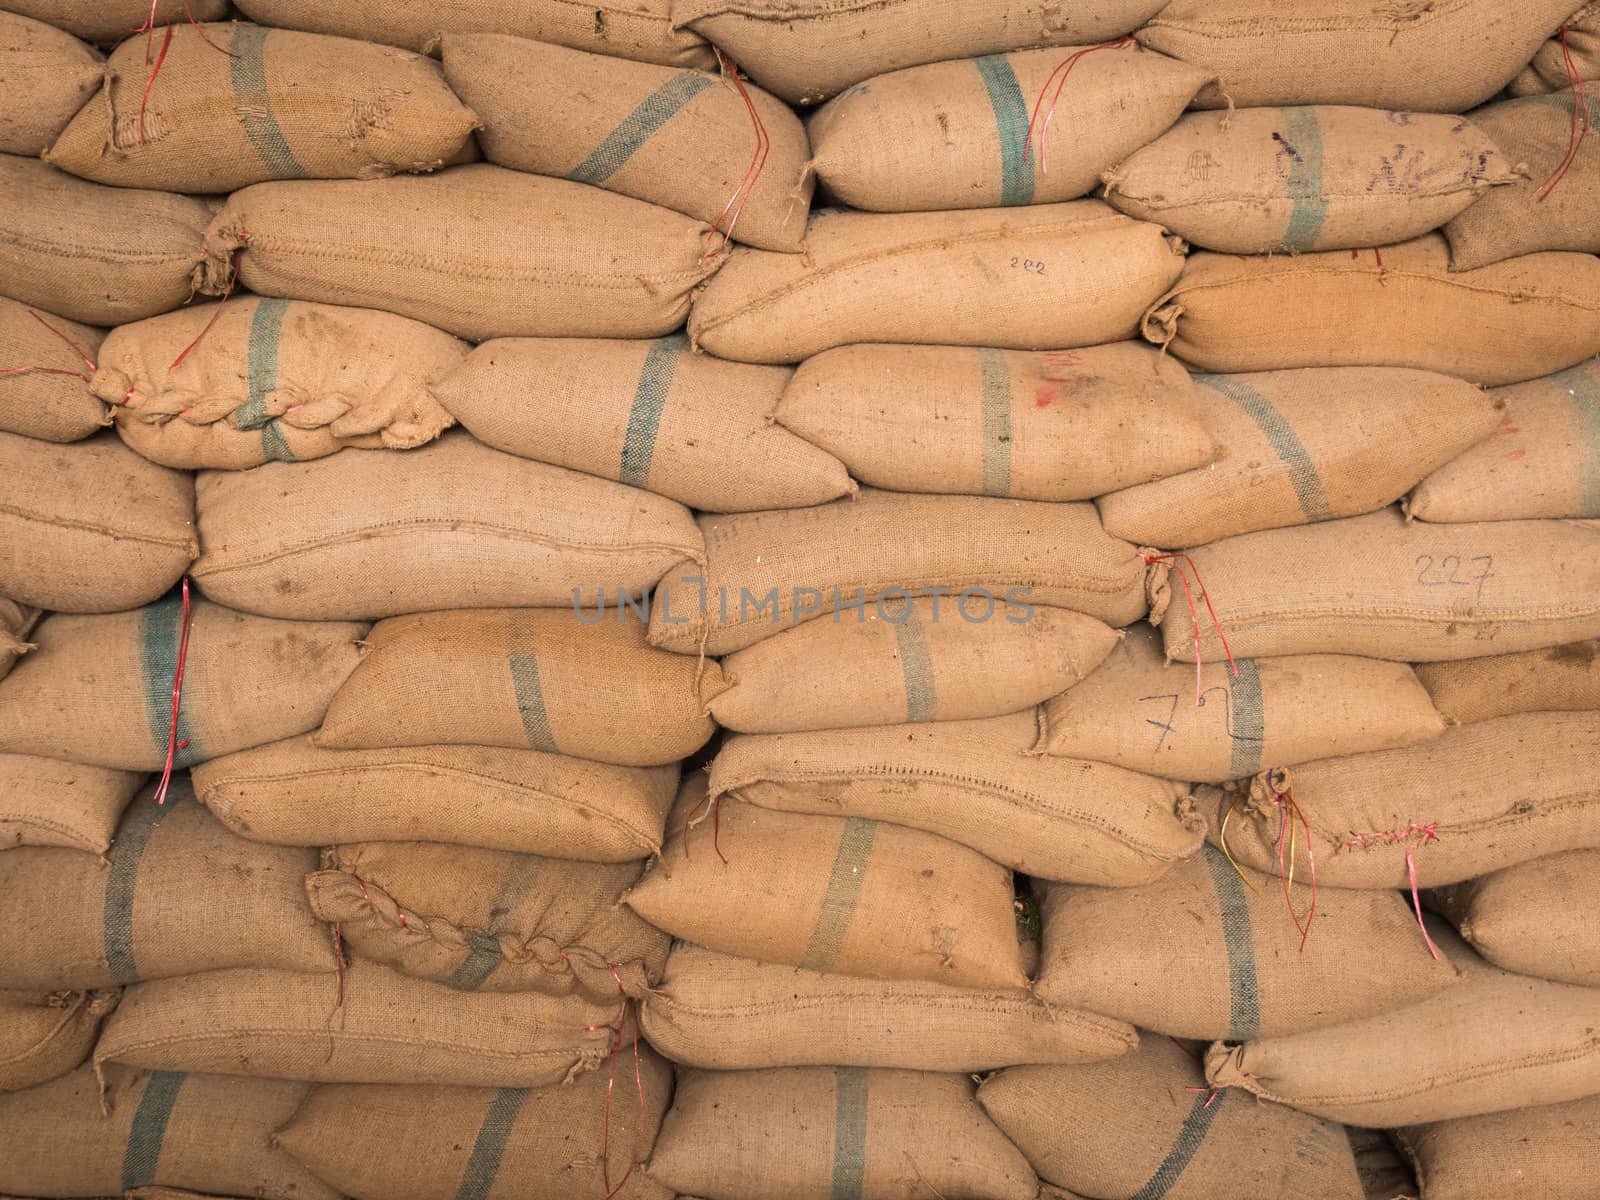 Old hemp sacks containing rice placed stacked in a row.